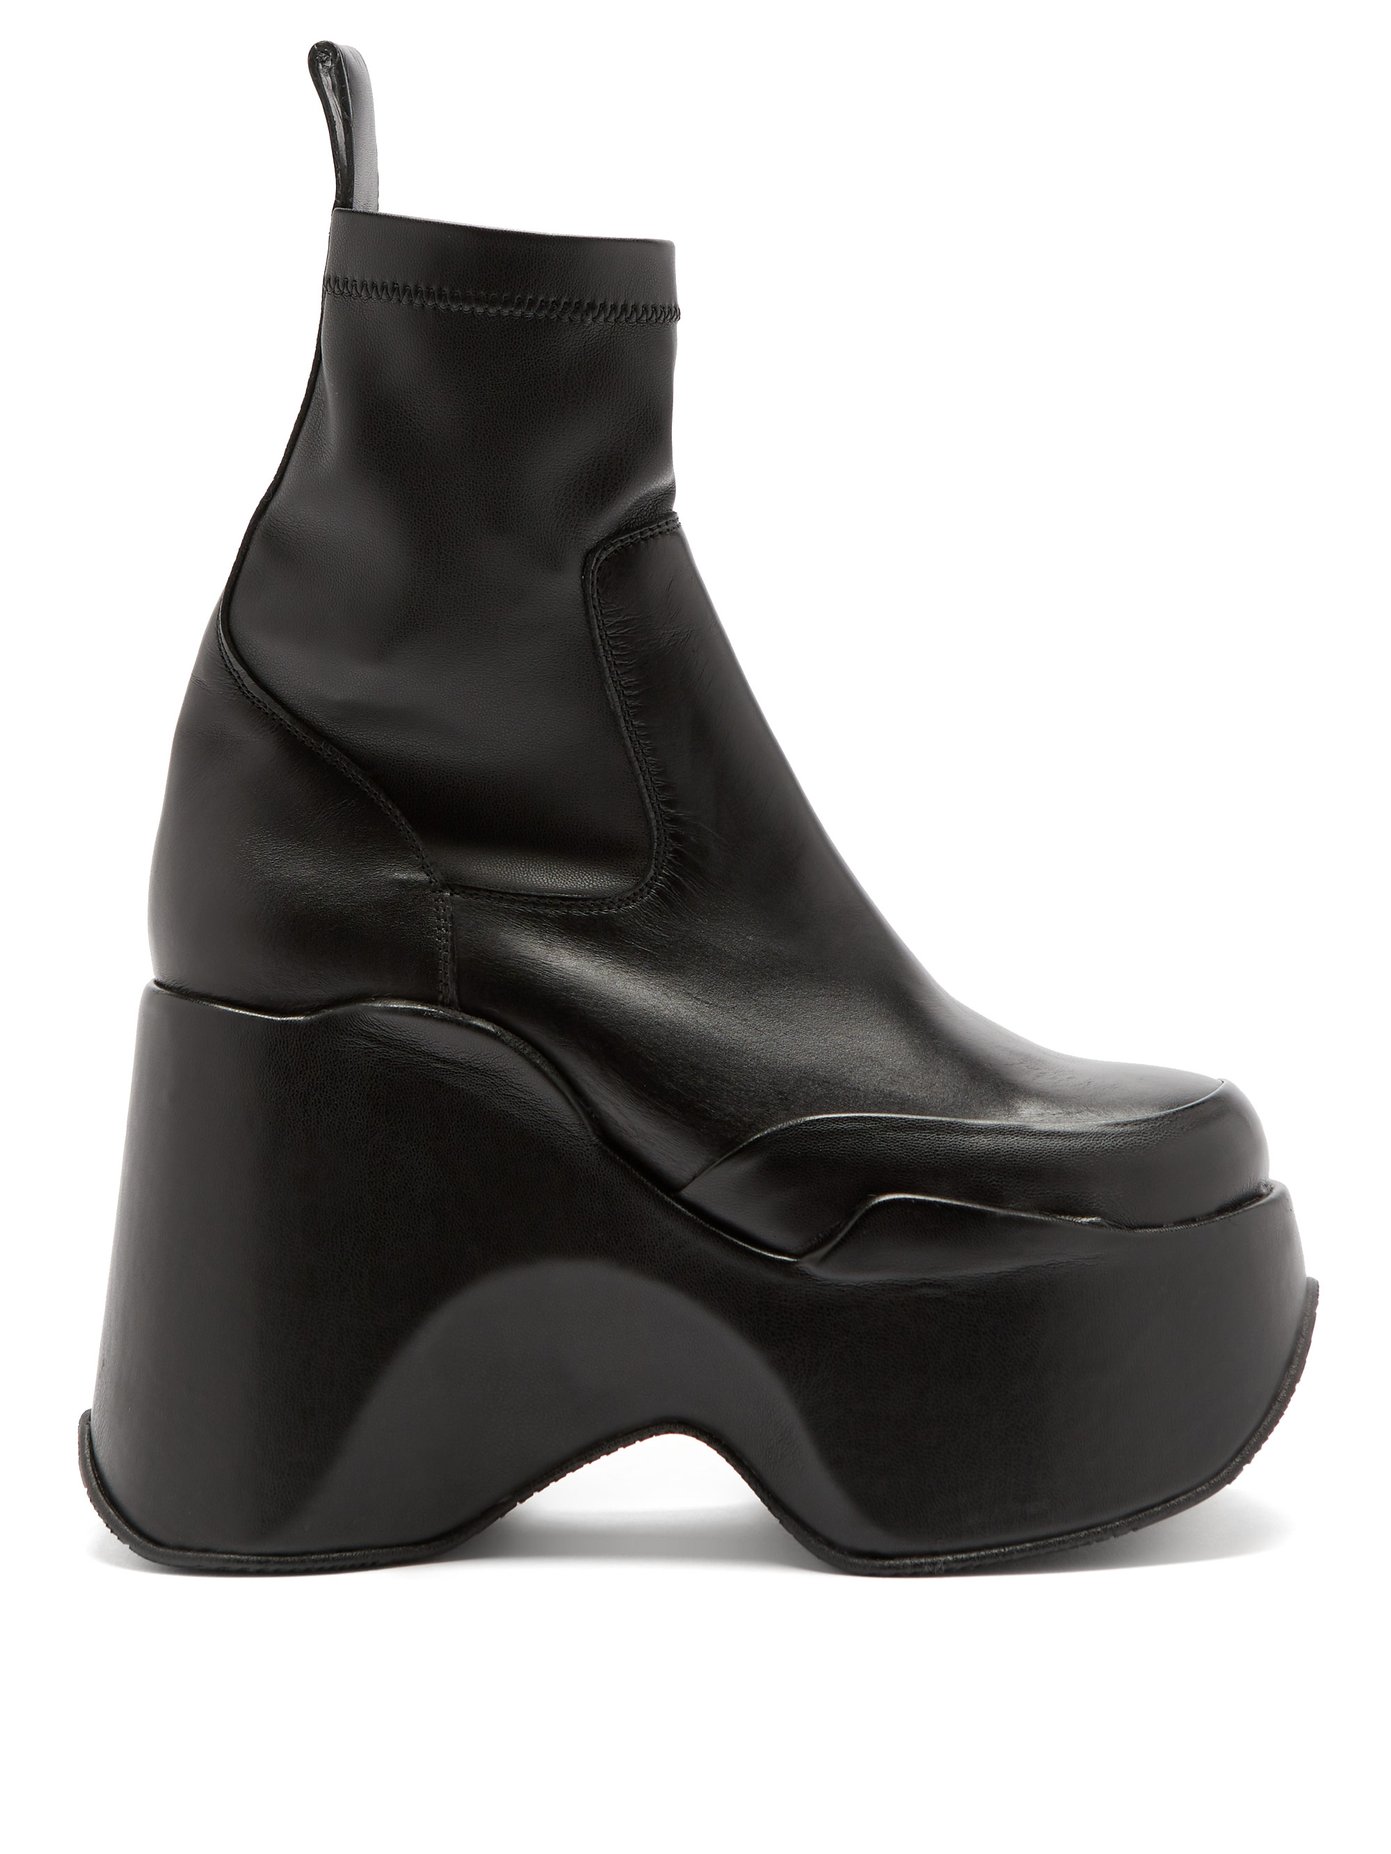 square toe leather ankle boots